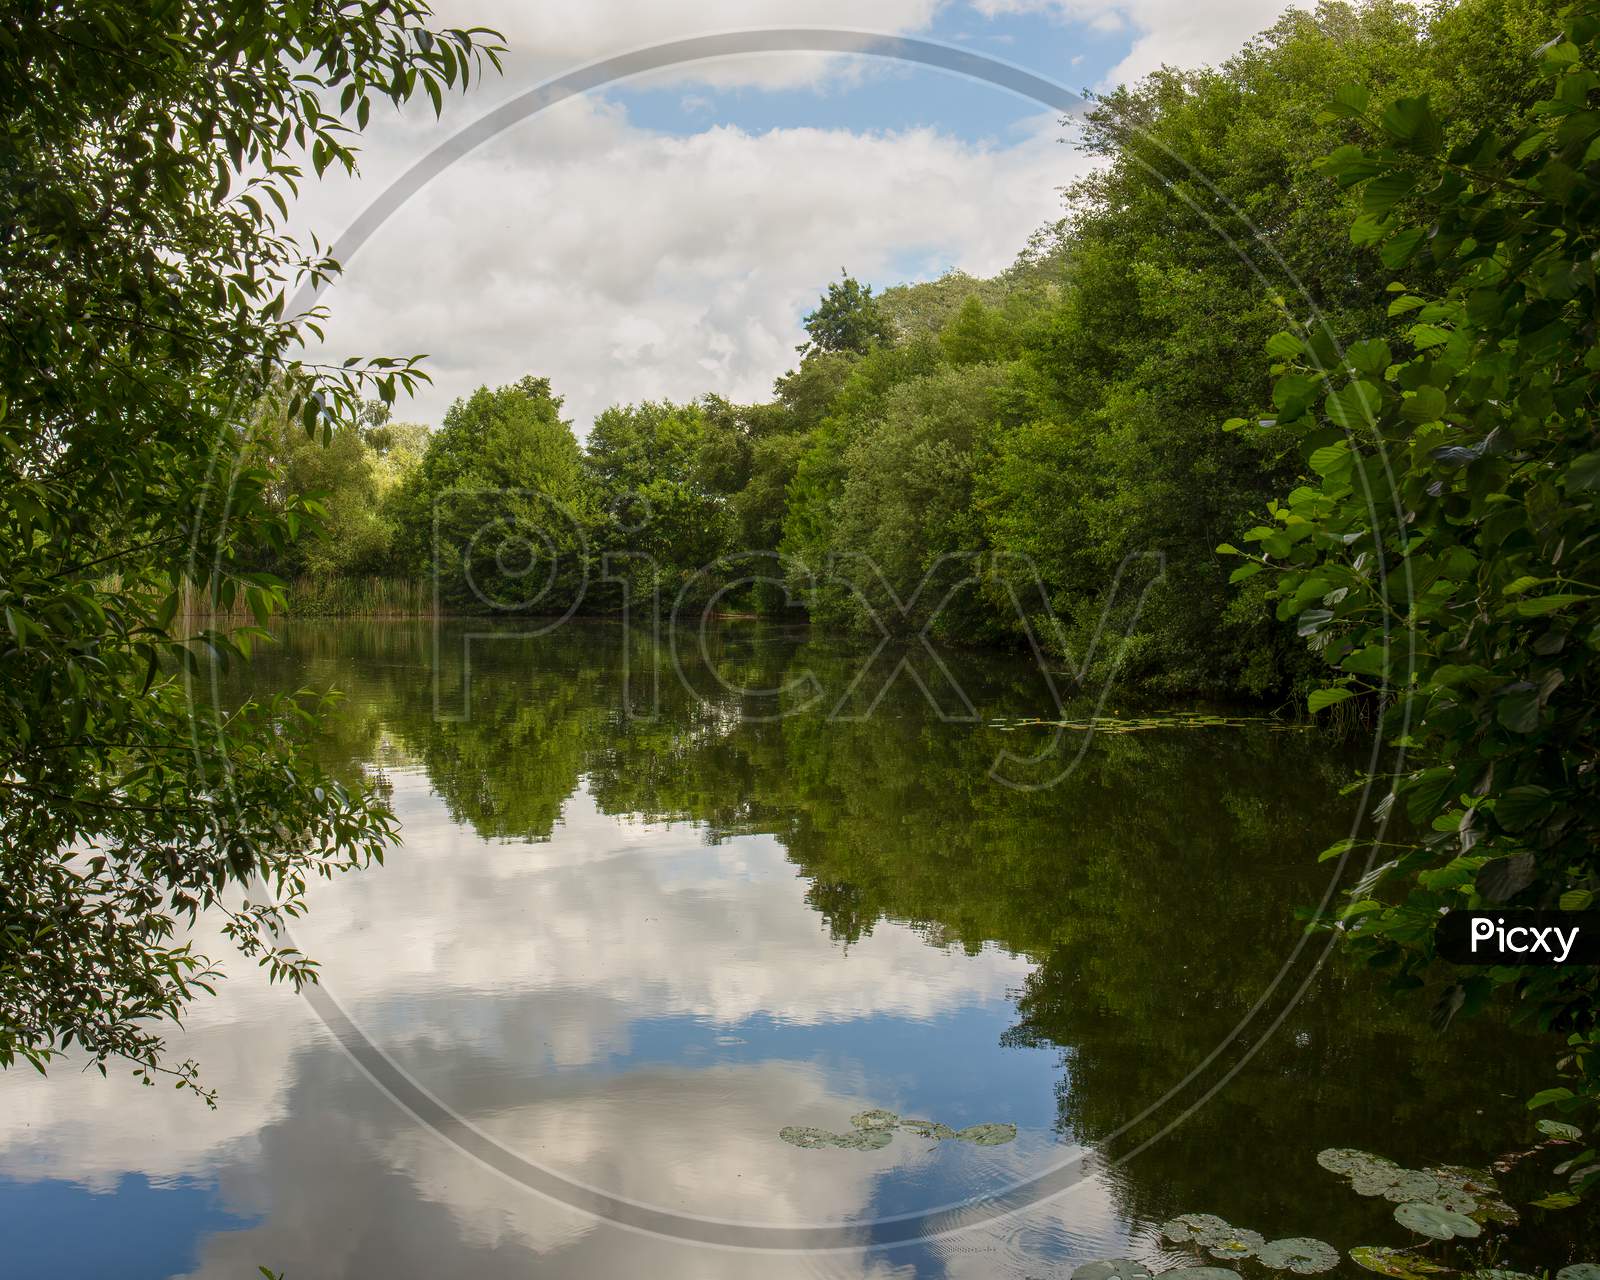 Lake Reflection Of Cloudy Blue Sky - Spring, Summers Season In England. Concept Of Tranquility And At One With Nature